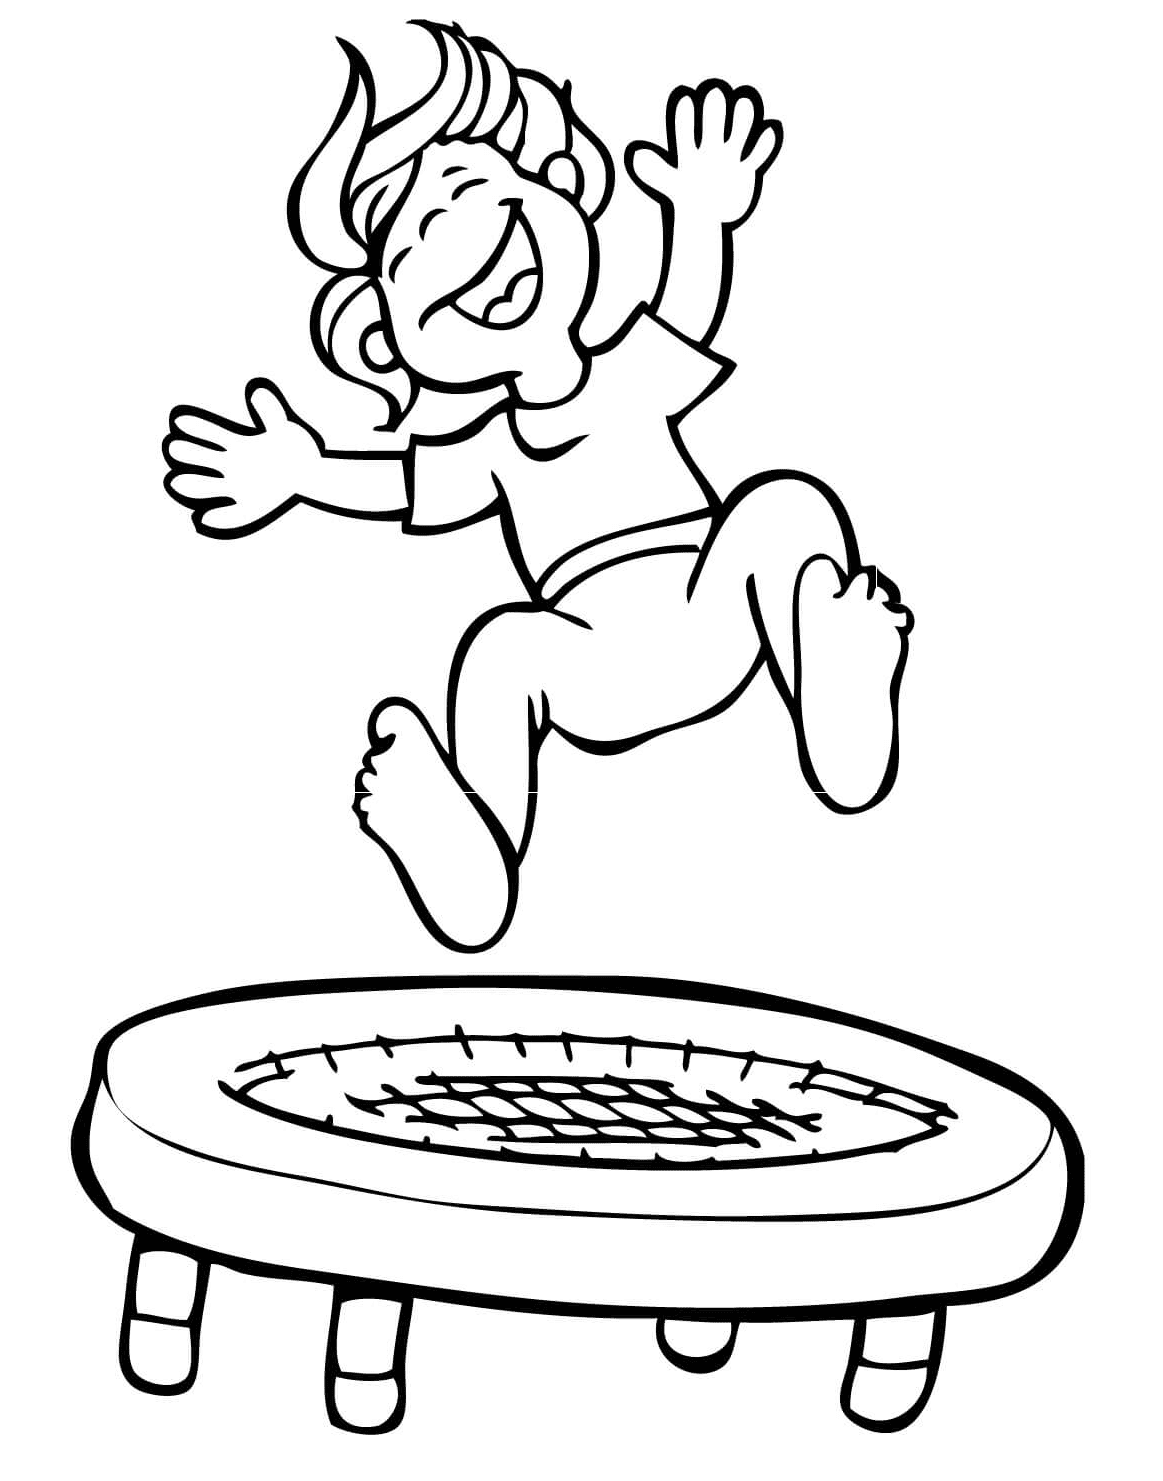 kid jumping on the trampoline coloring